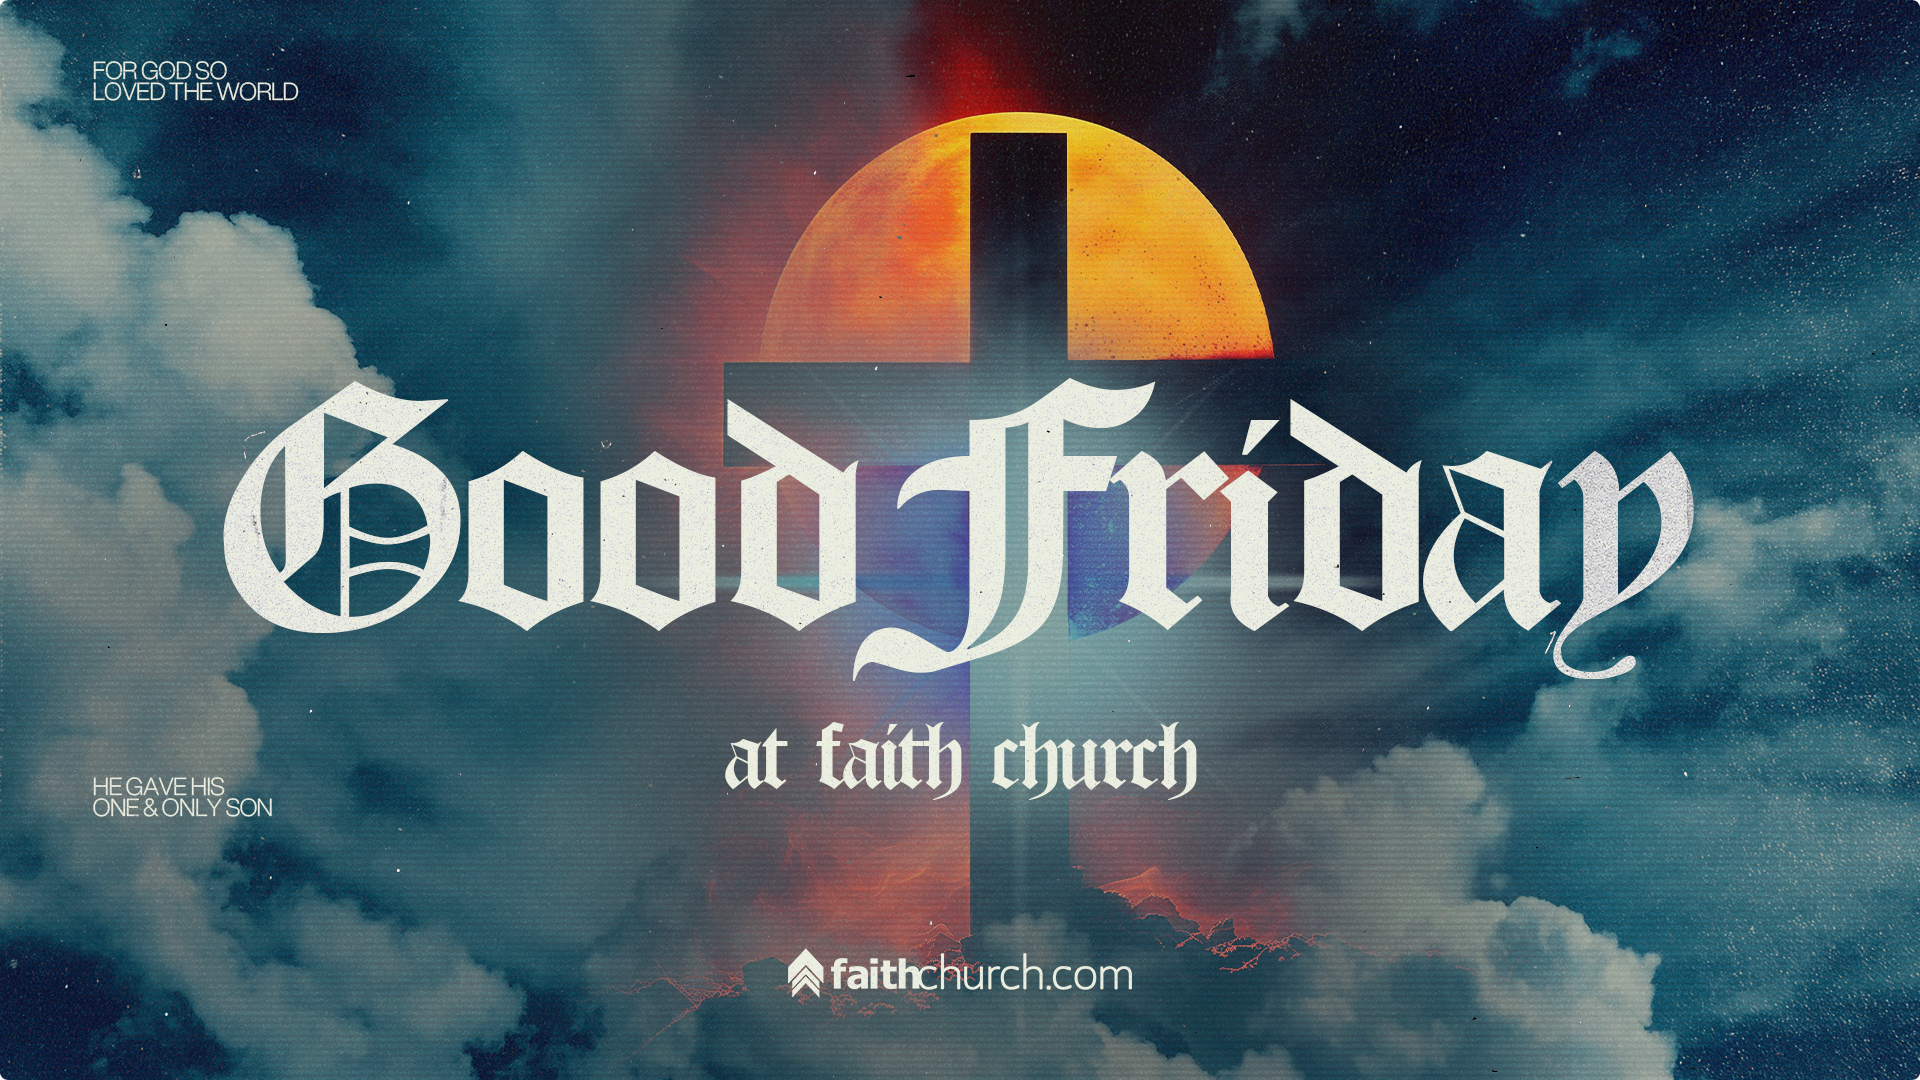 What Is Good Friday?